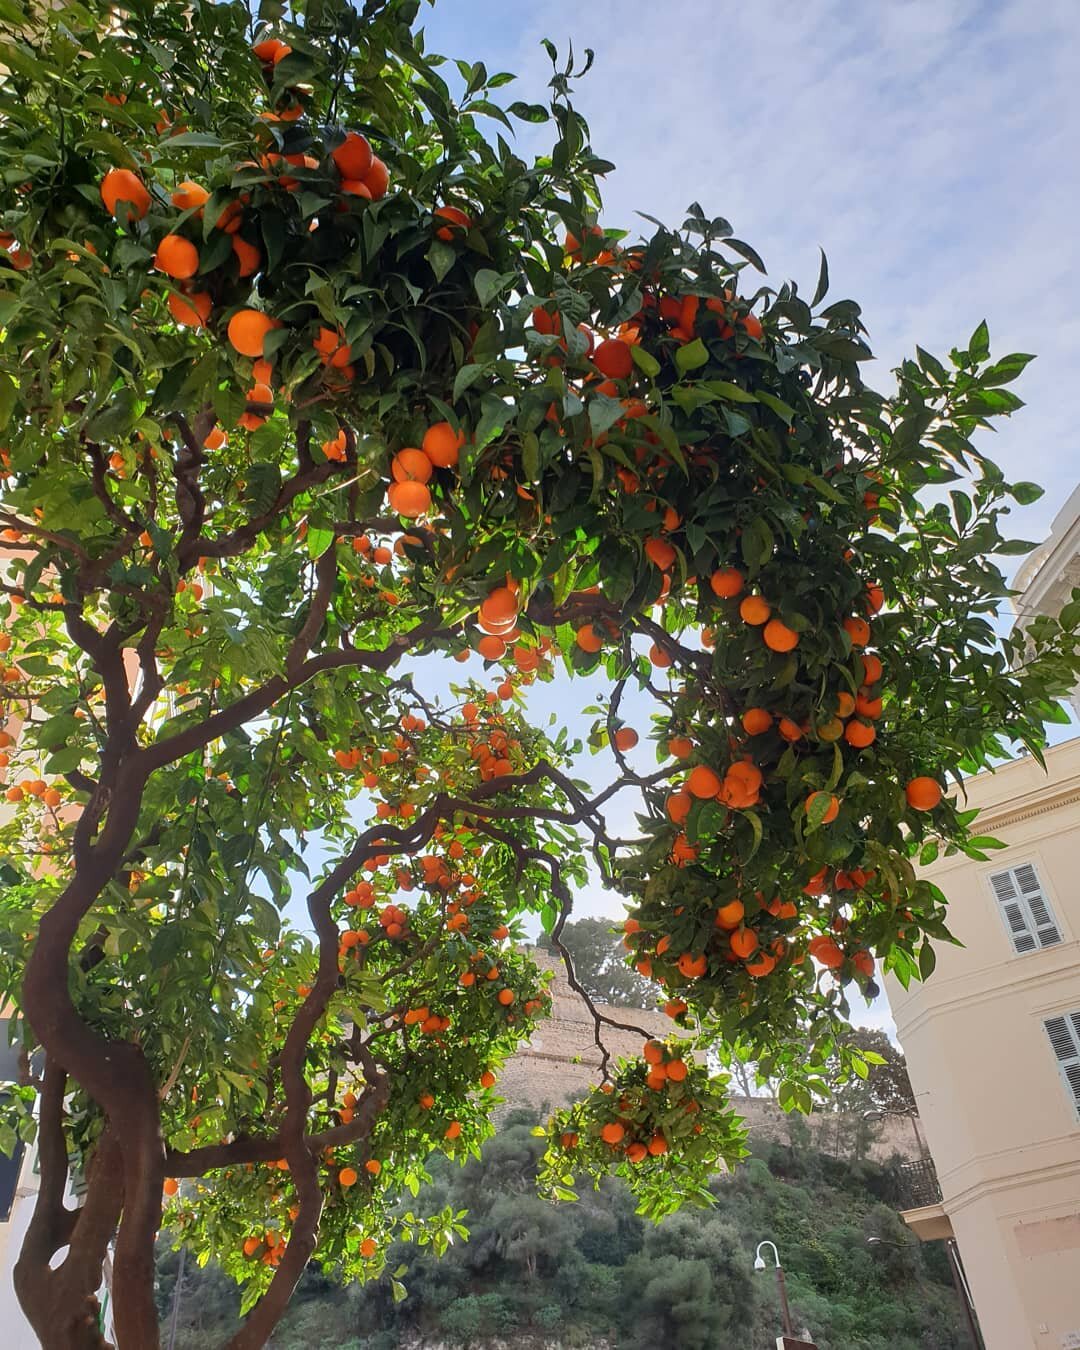 This is the closest orange tree to our distillery, located literally 50 metres from the front door!
The sun is shining today, and ripening the fruit to perfection for the harvest starting next week. 
We can't wait to taste the 2021 vintage!